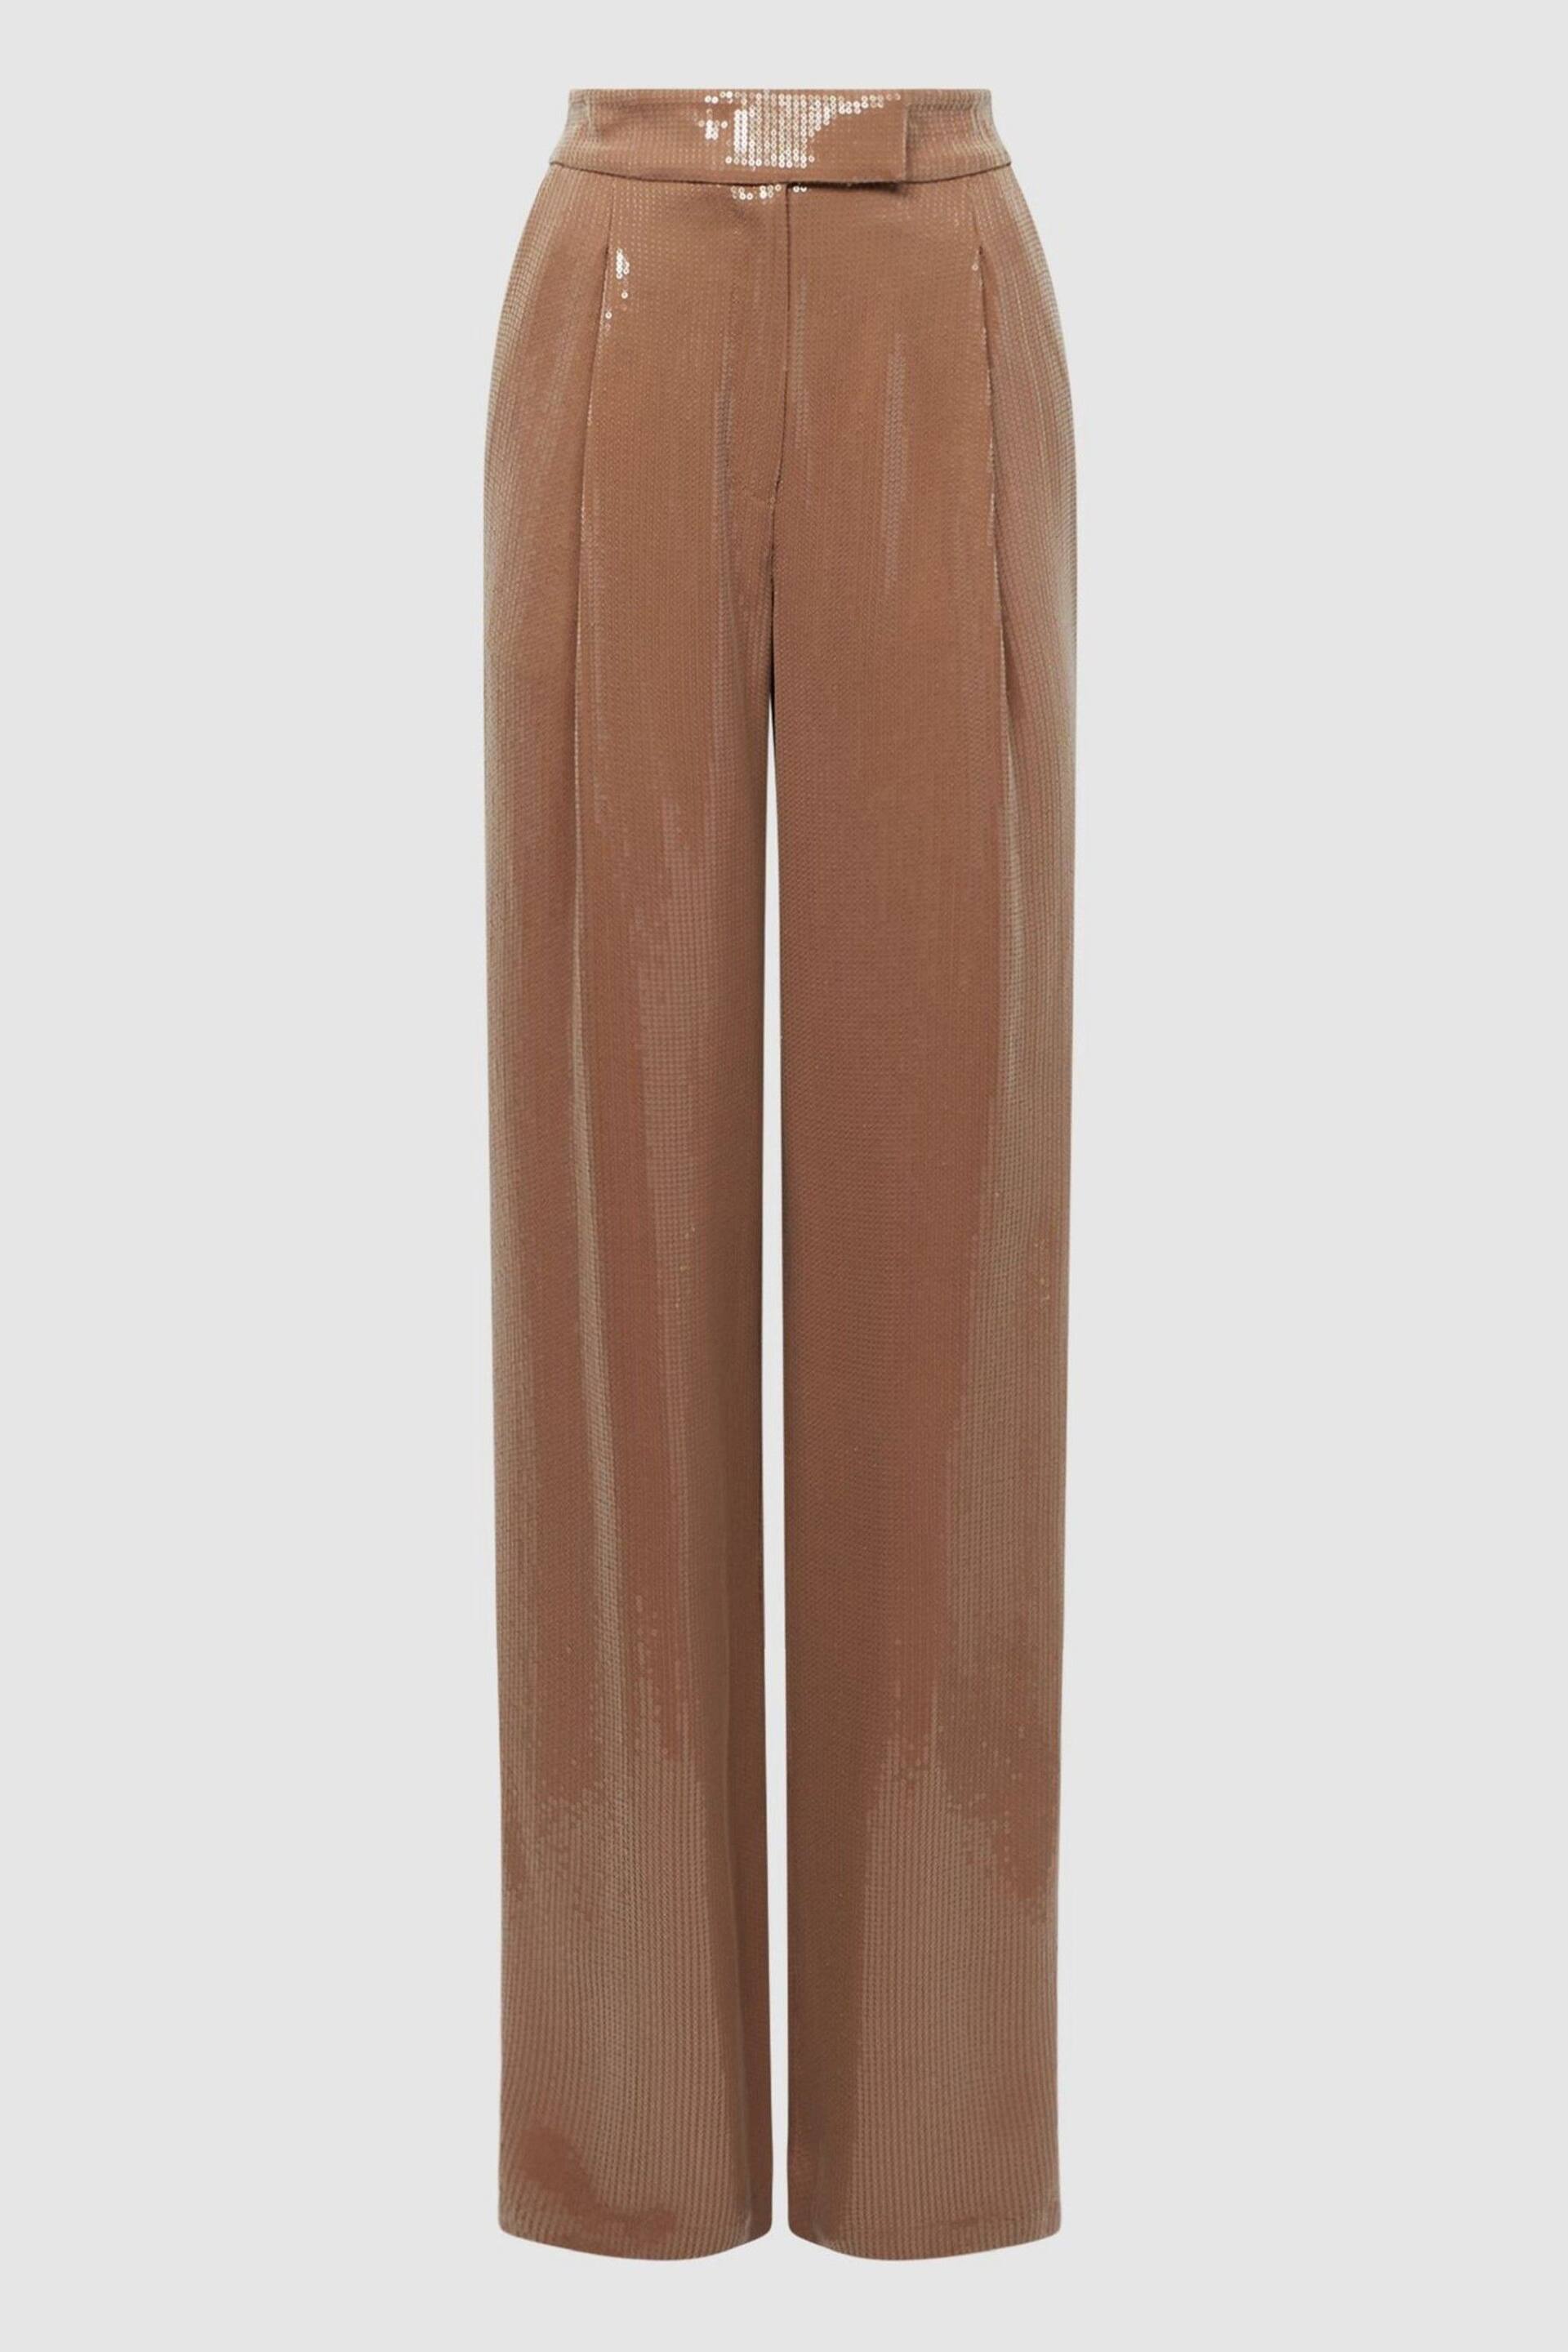 Reiss Nude Lizzie Sequin Wide Leg Trousers - Image 2 of 7